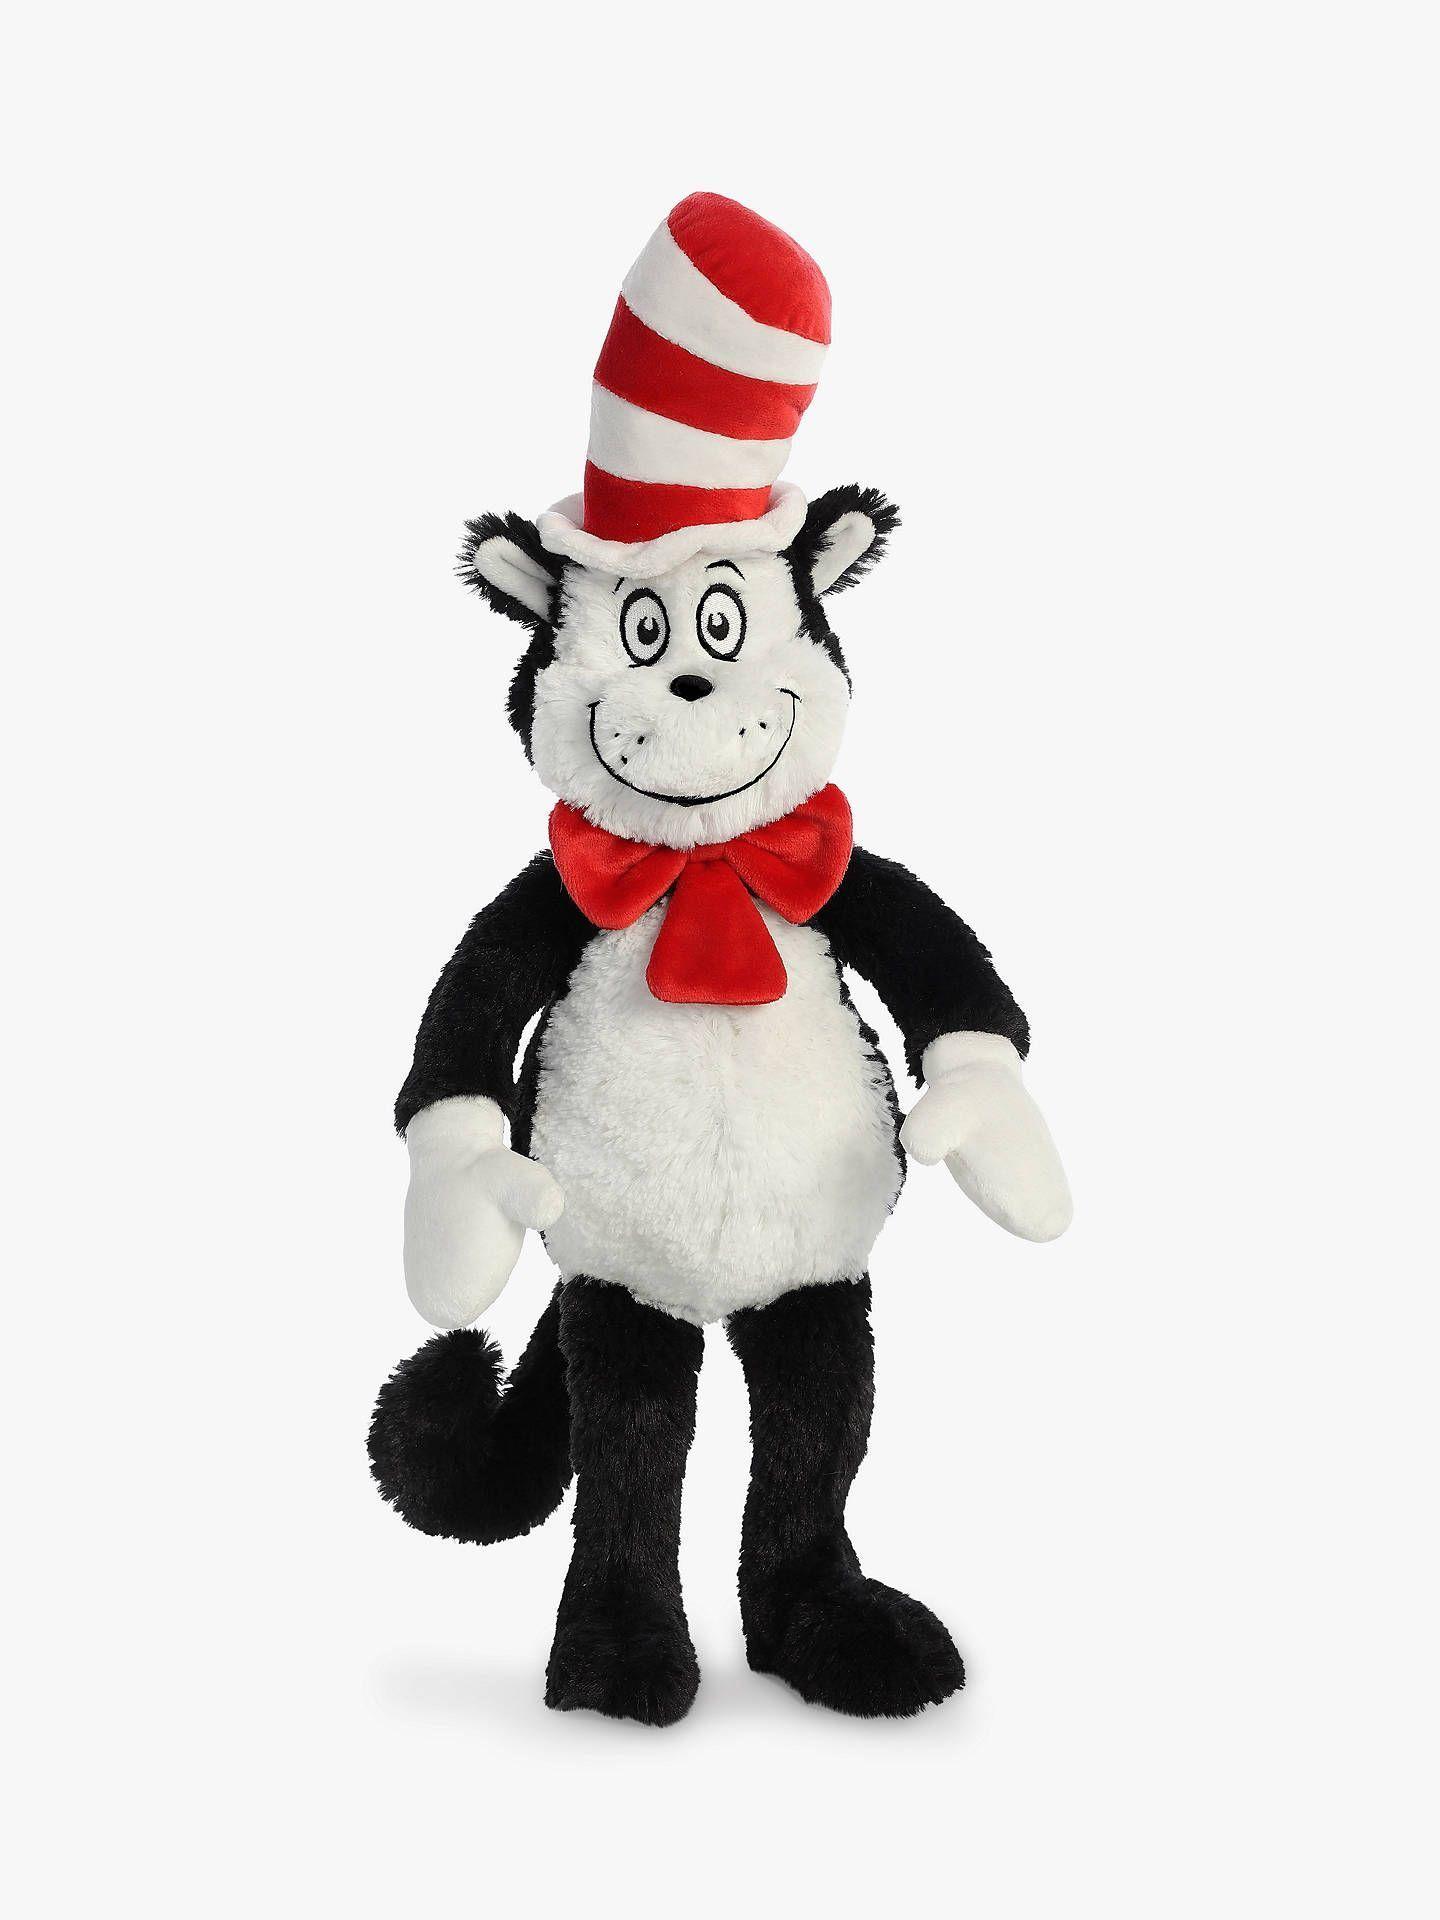 Trigger recomended toys the Cat in hat